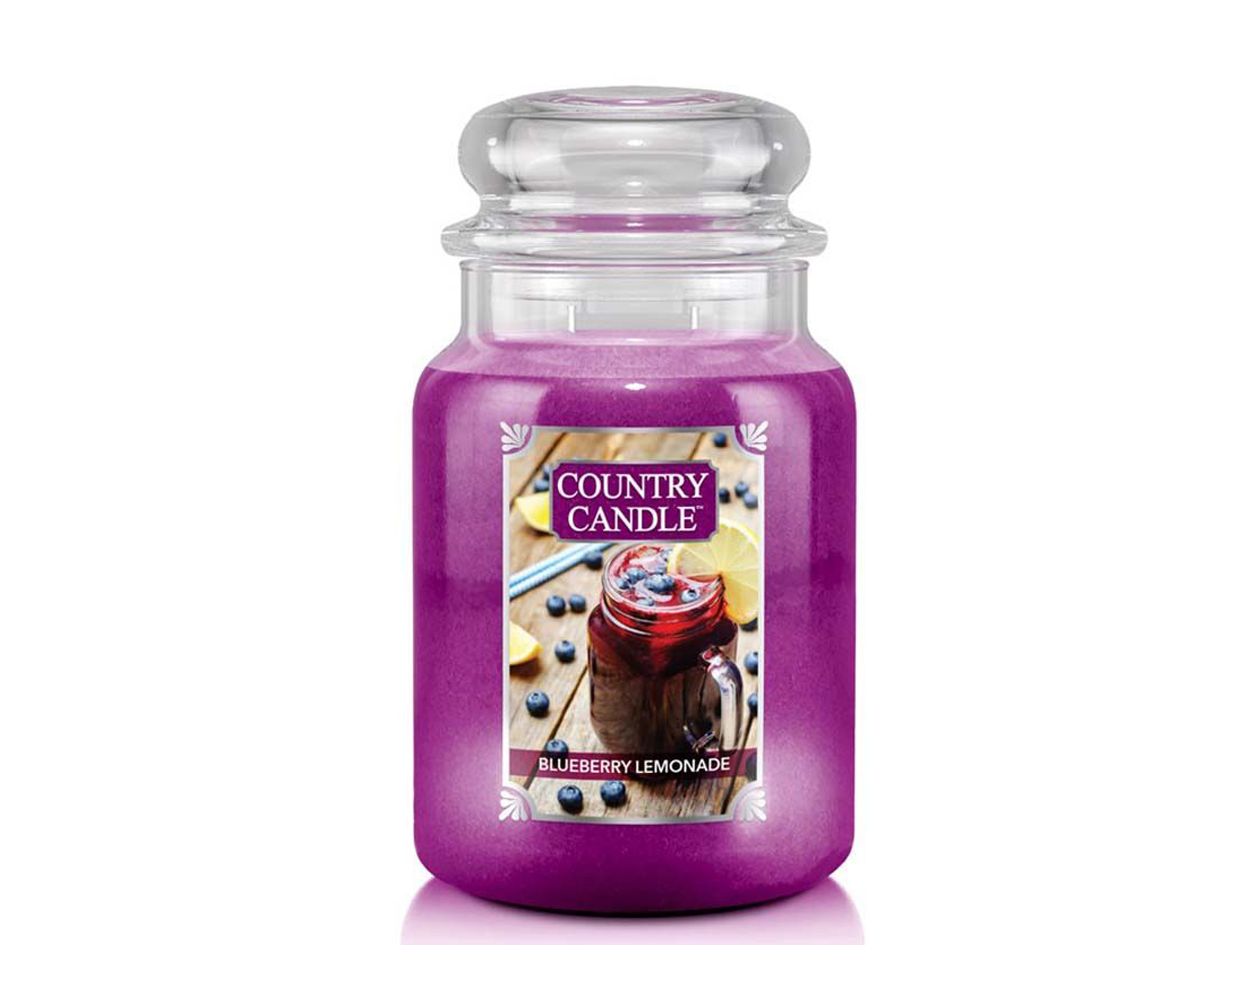 Cotton Candy Clouds Scented Candle from Country Candle